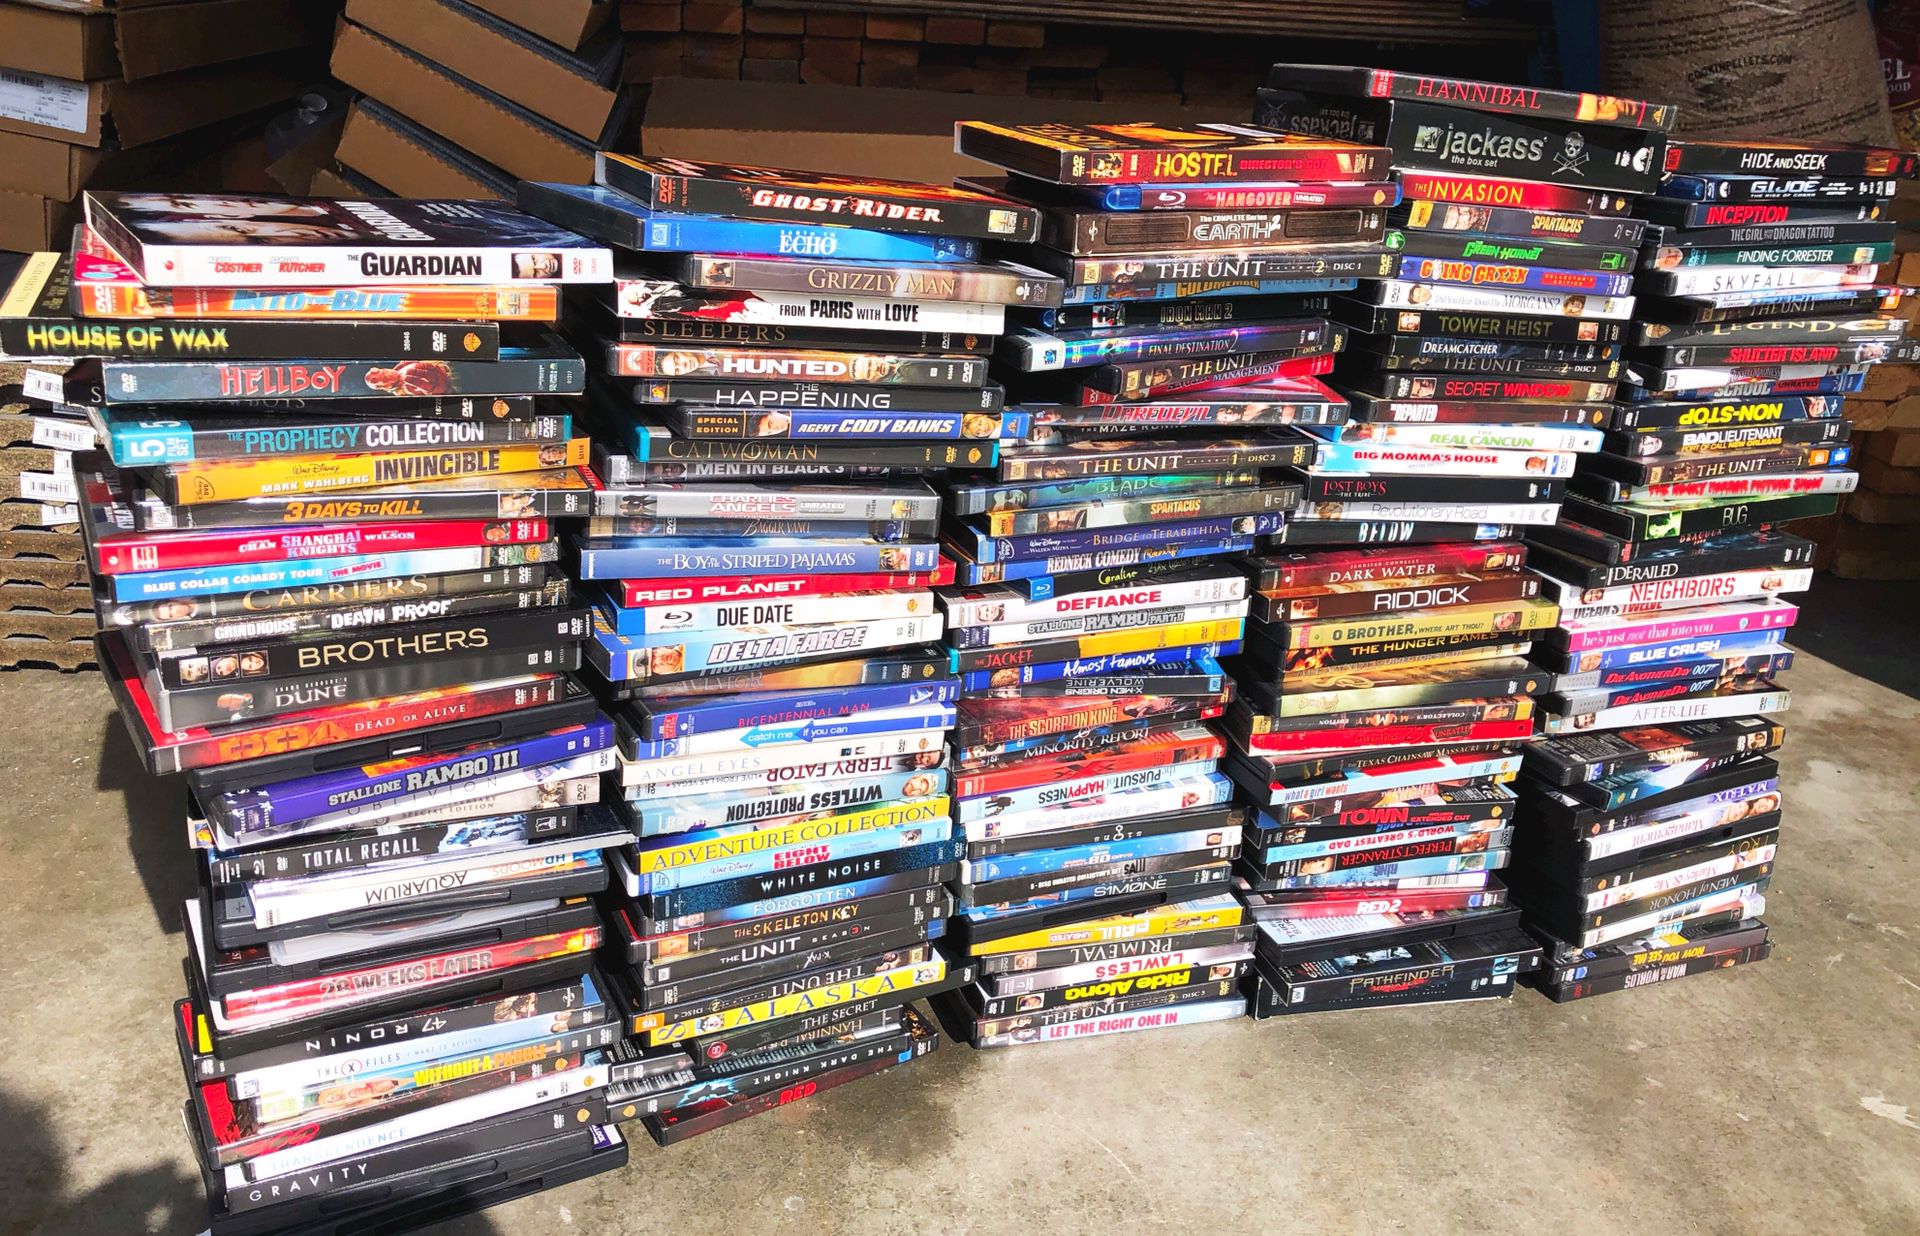 Movies- roughly around 200 in this lot $50 OBO